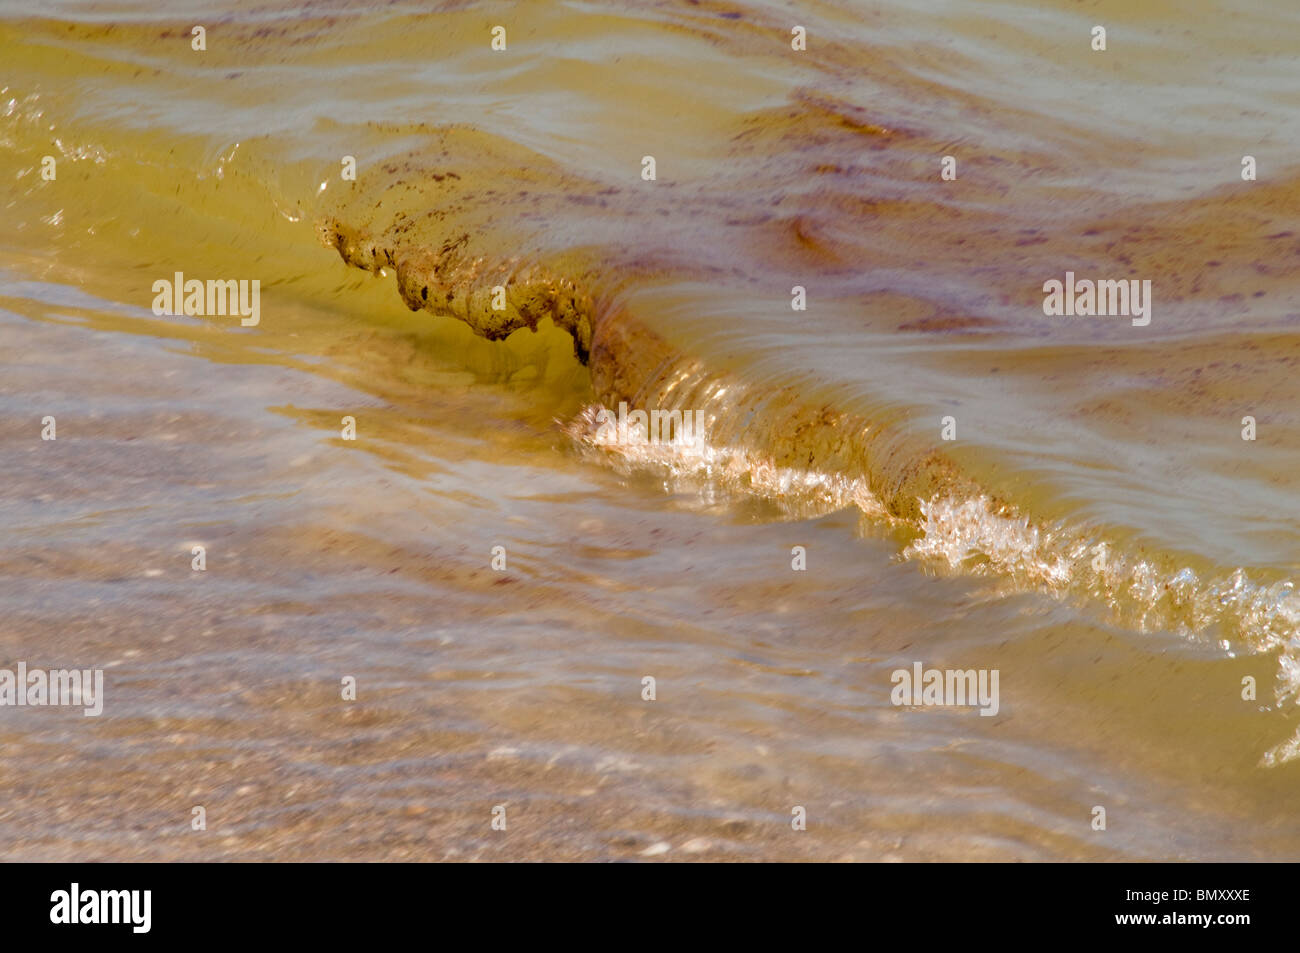 Oil in the water during 2010 BP oil spill Stock Photo